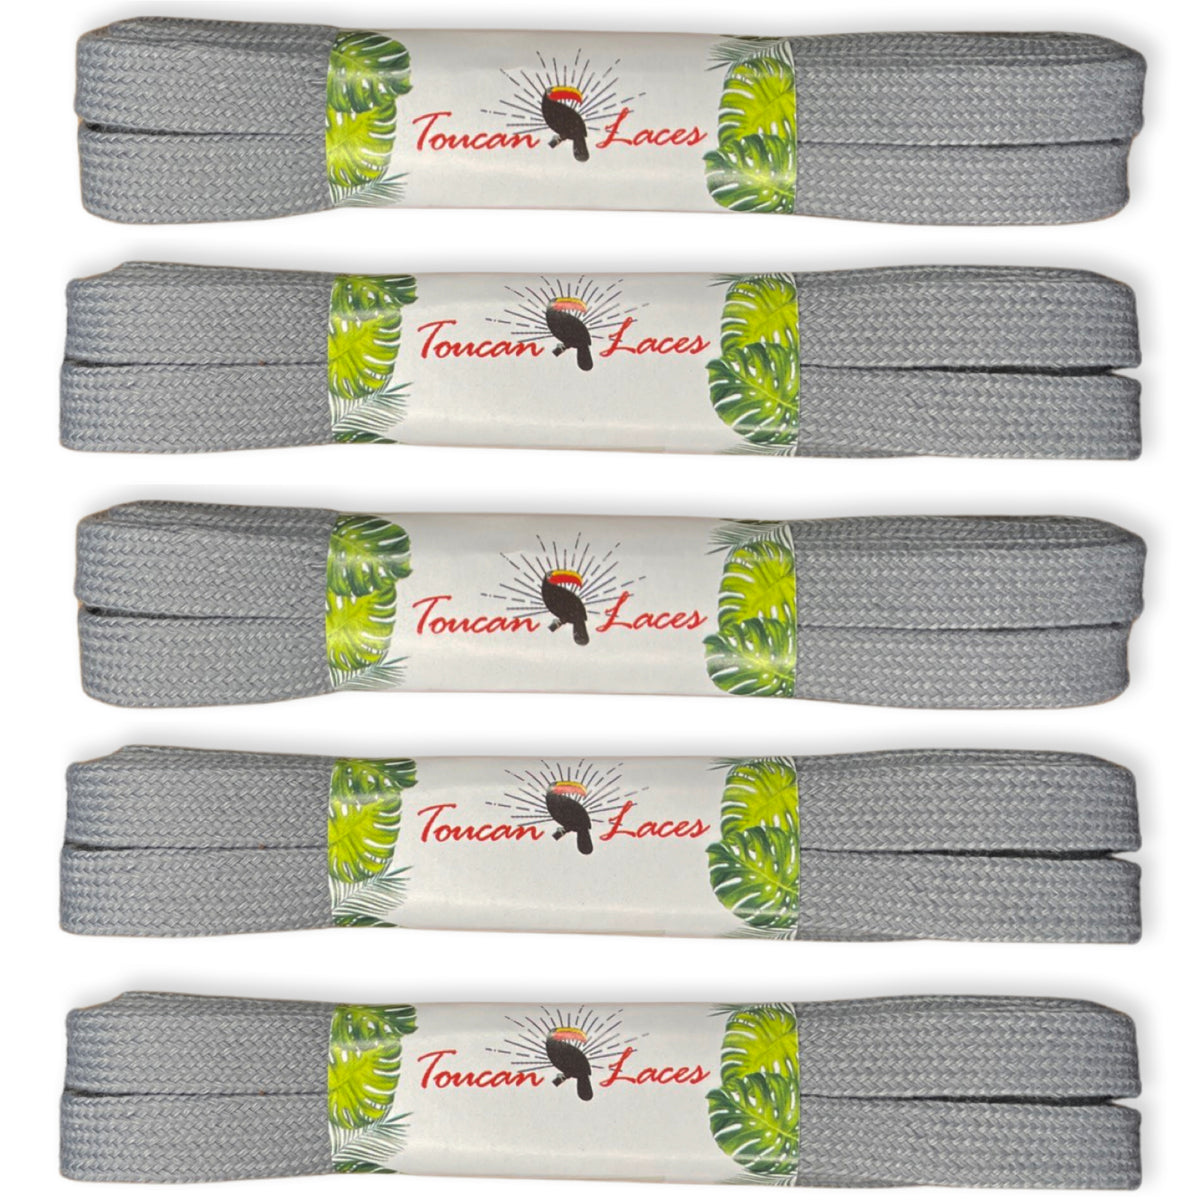 Gray Shoe Laces | Gray Shoe Laces Replacement Laces for Sneakers & Casual Shoes